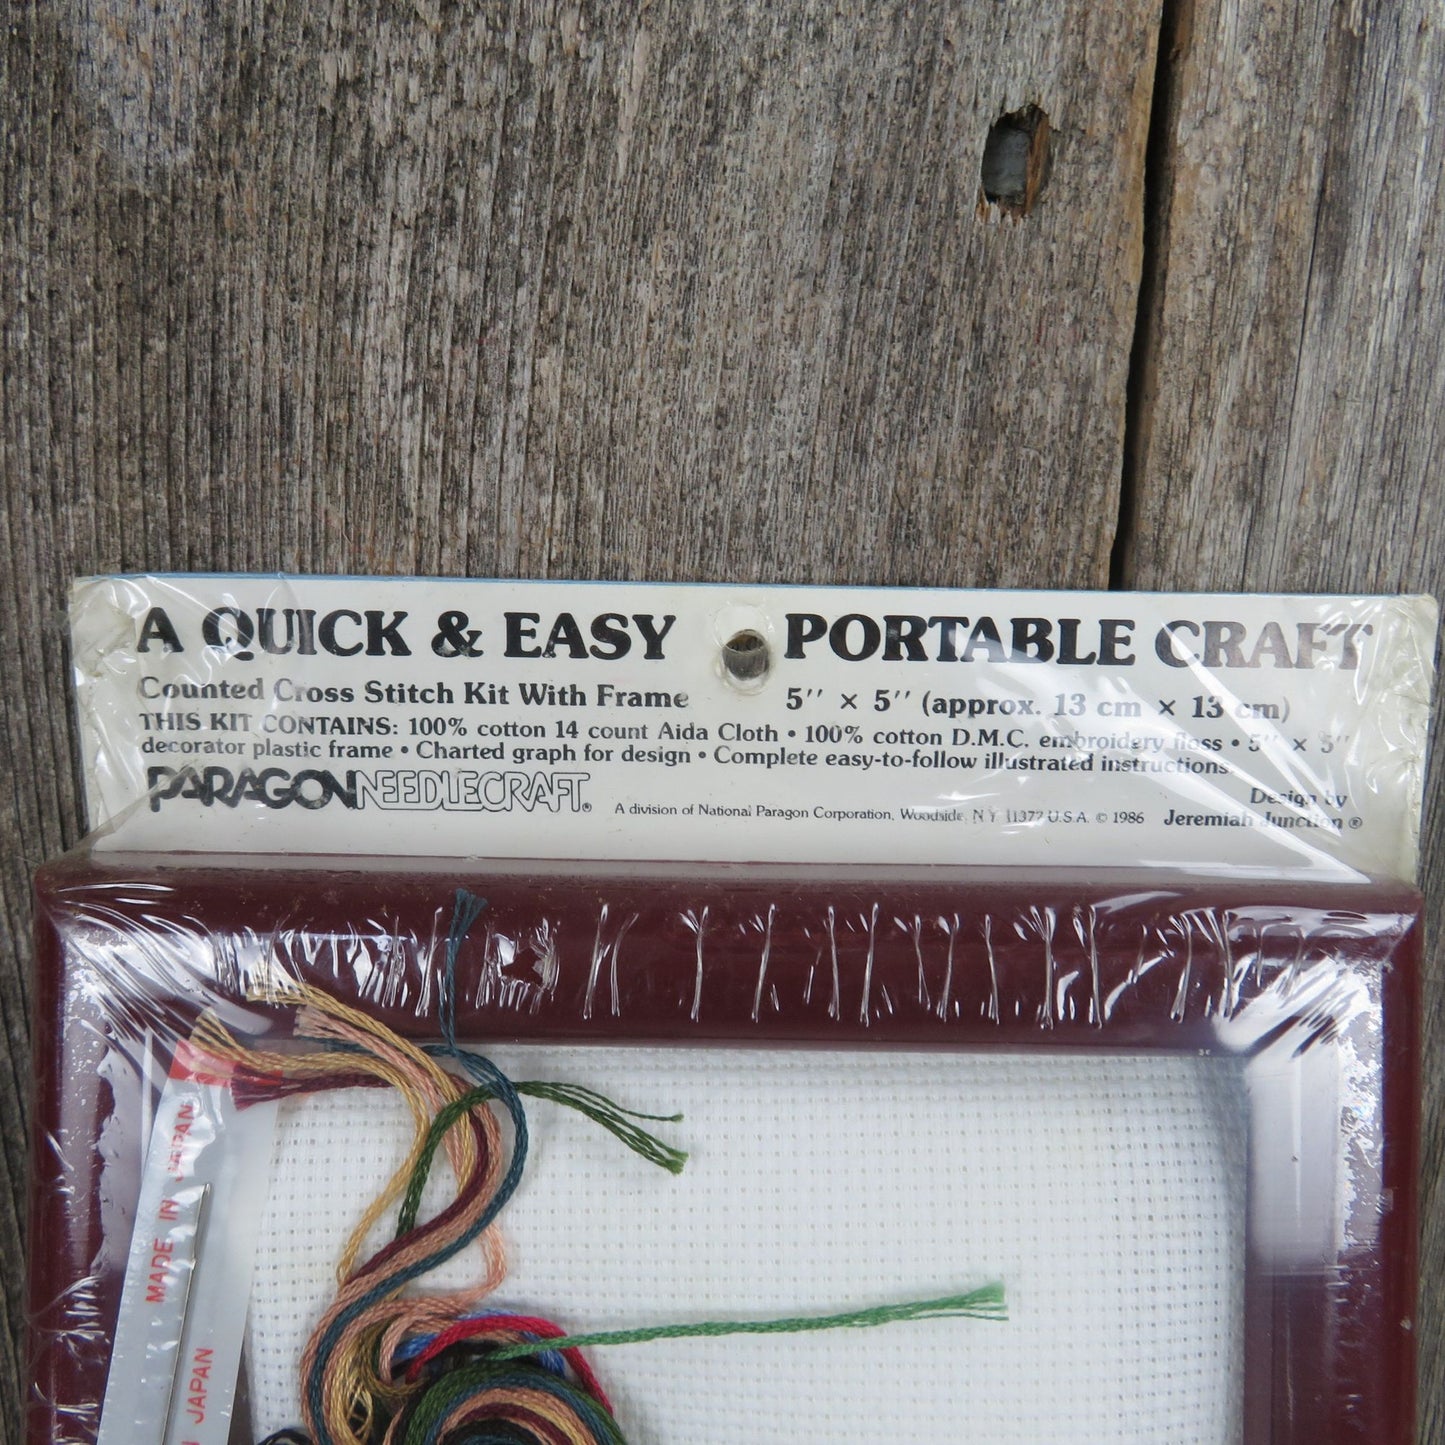 Country Kitchen Counted Cross Stitch Kit Paragon 1986 Framed Kit 8104 Quick and Easy